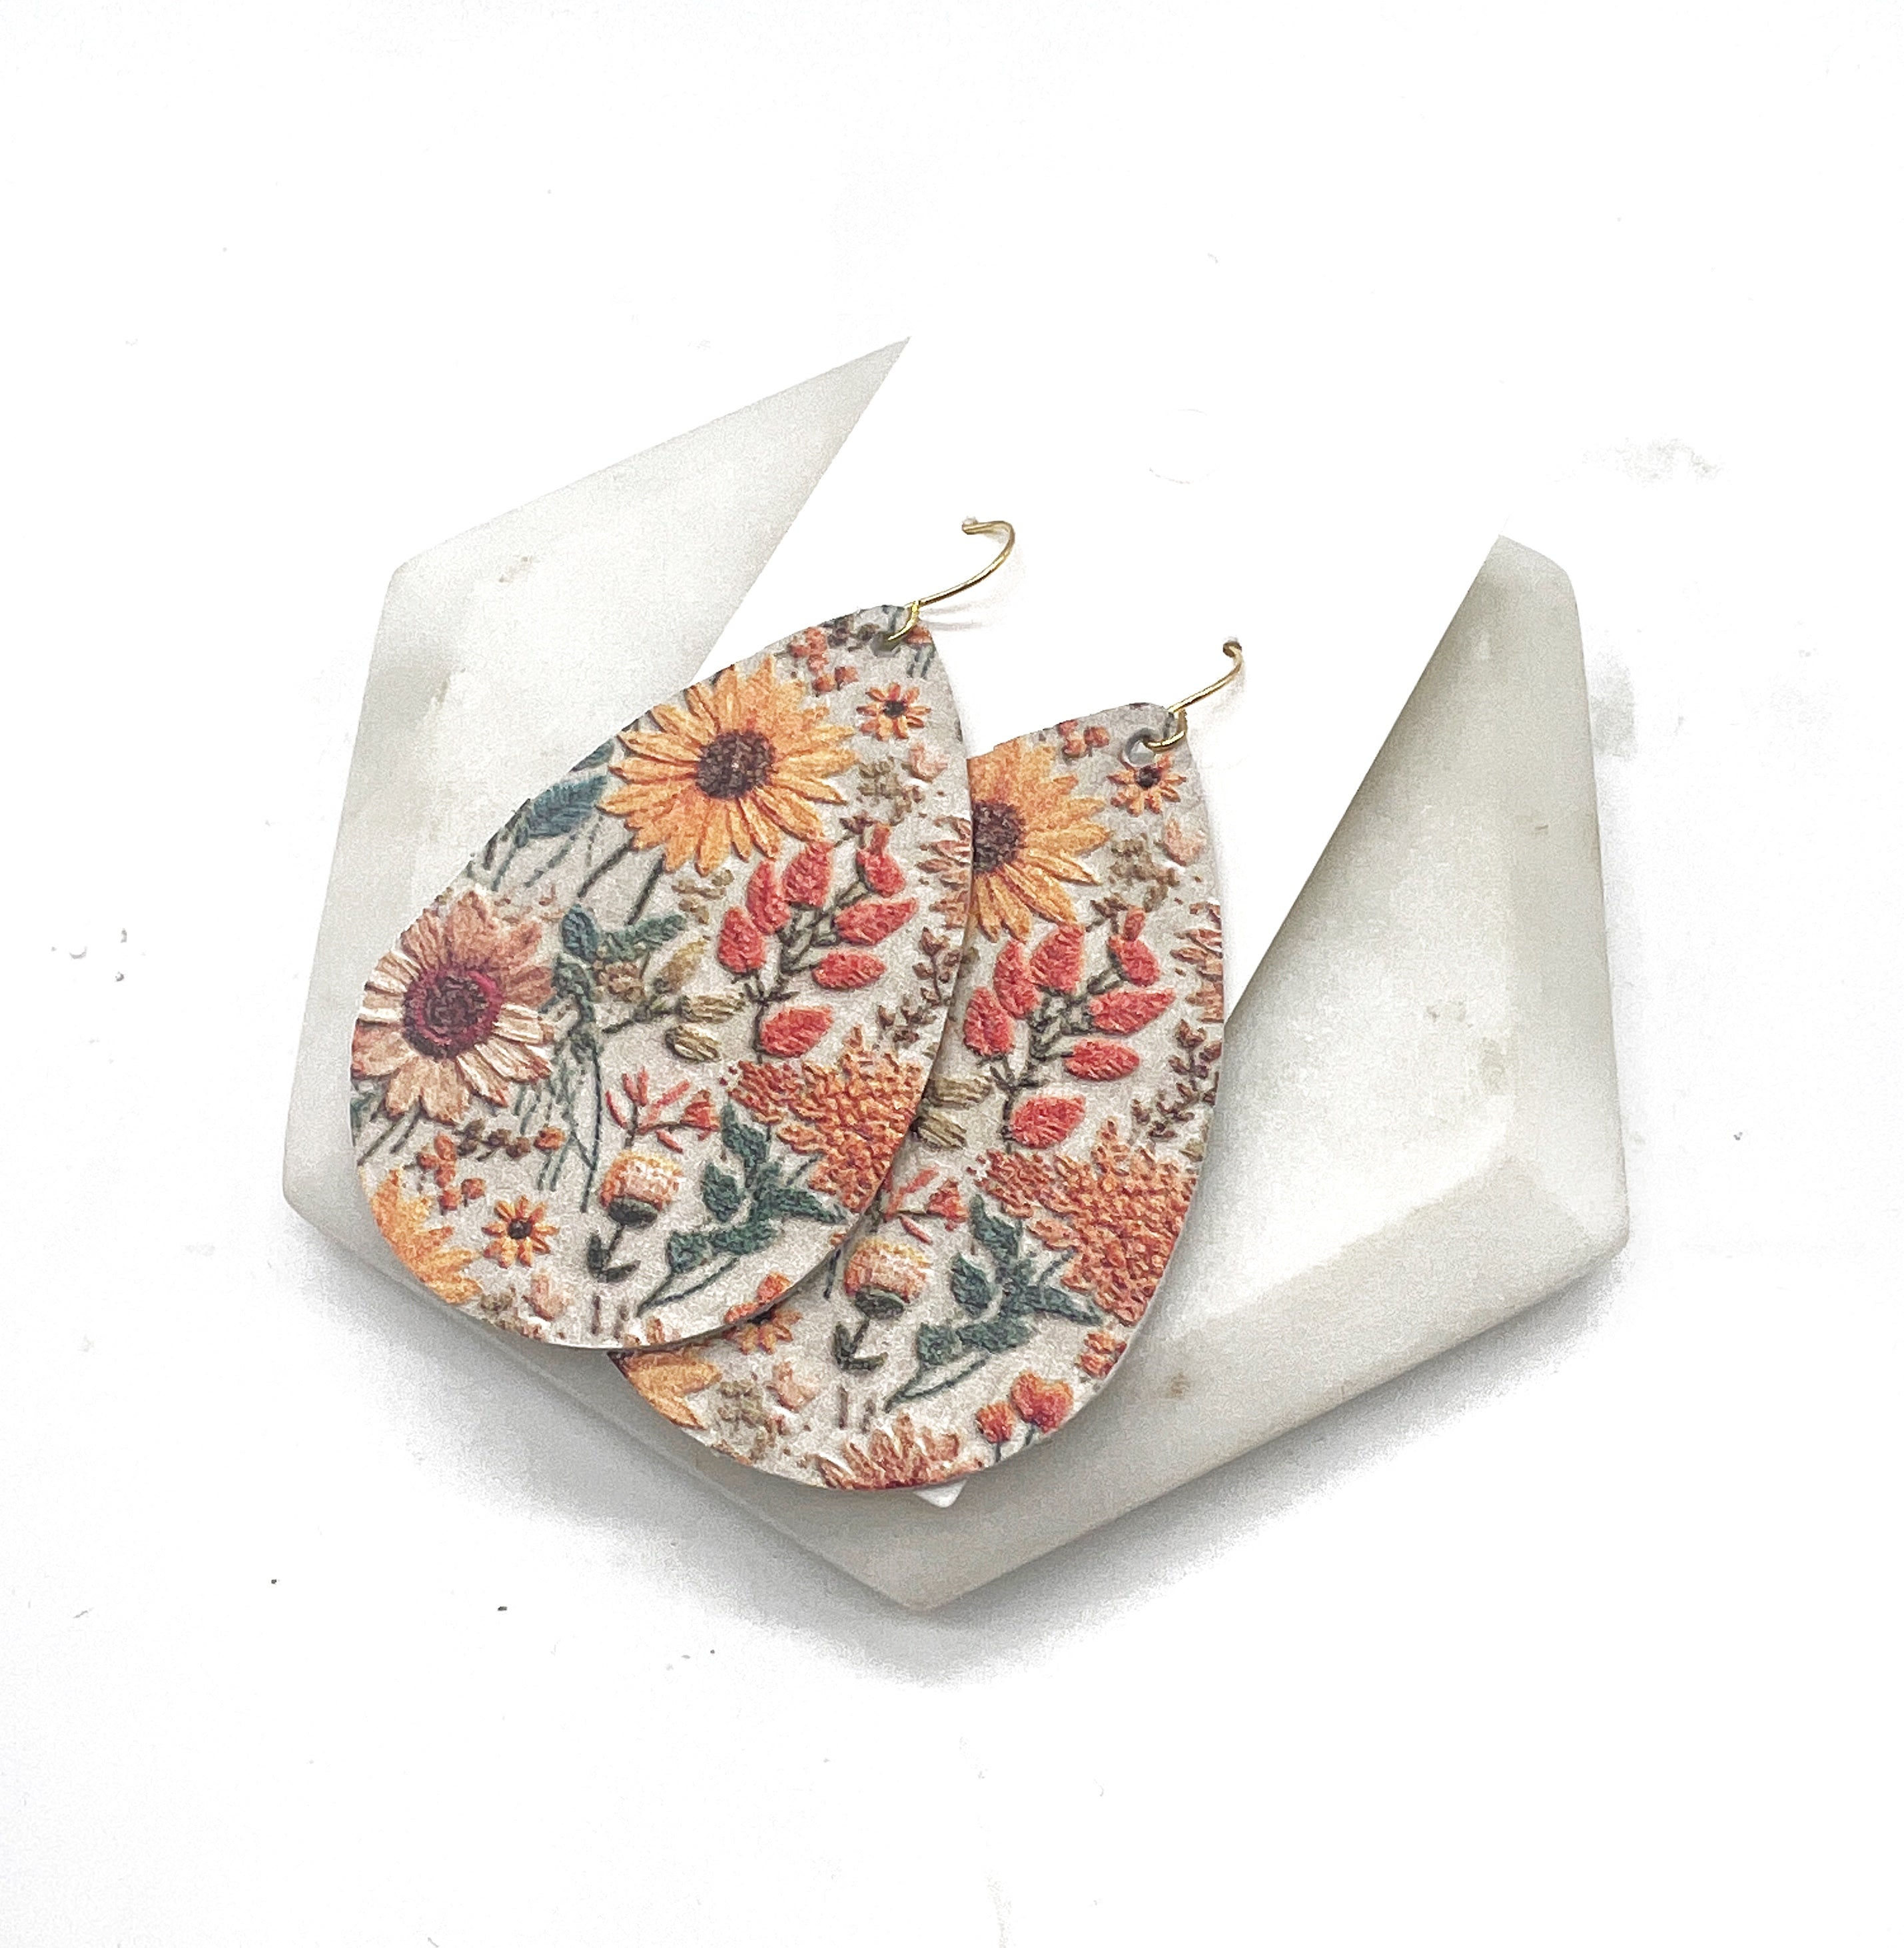 Embroidered Sunflower Leather Teardrop